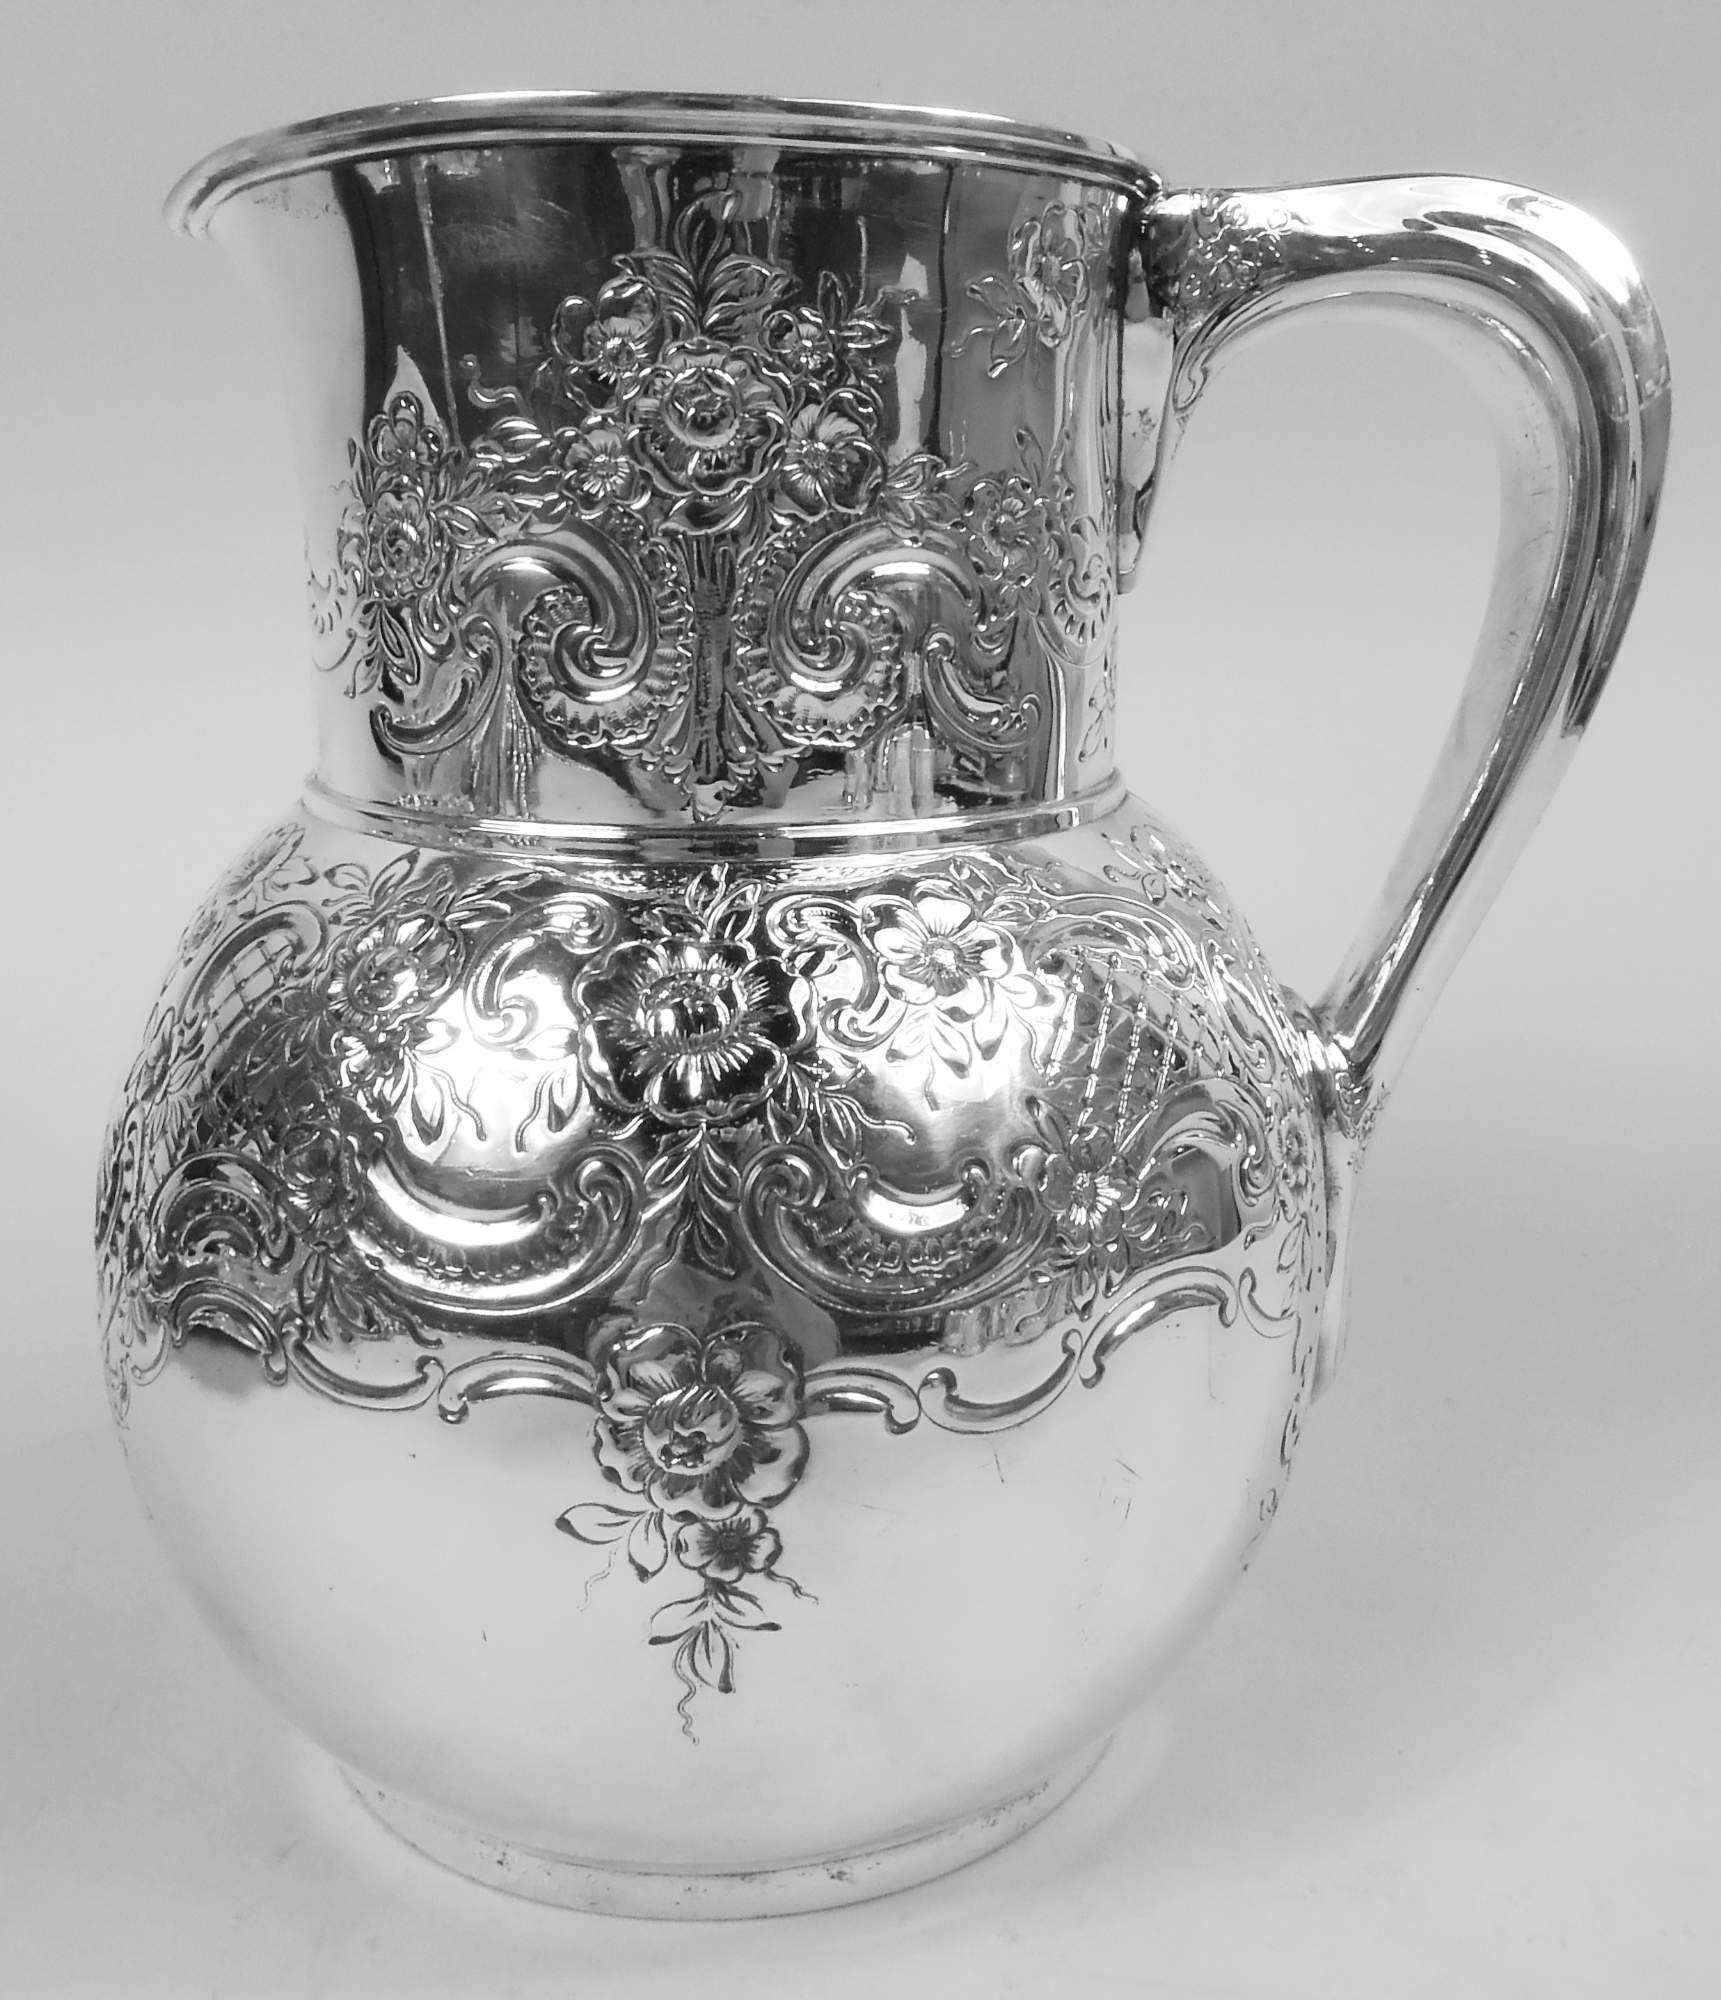 Victorian Classical sterling silver water pitcher. Made by Tiffany & Co. in New York, ca 1878. Globular with drum-form neck, small lip spout, and scroll bracket handle. Chased floral, scroll, and diaper ornament with leafing scrolled frame (vacant).